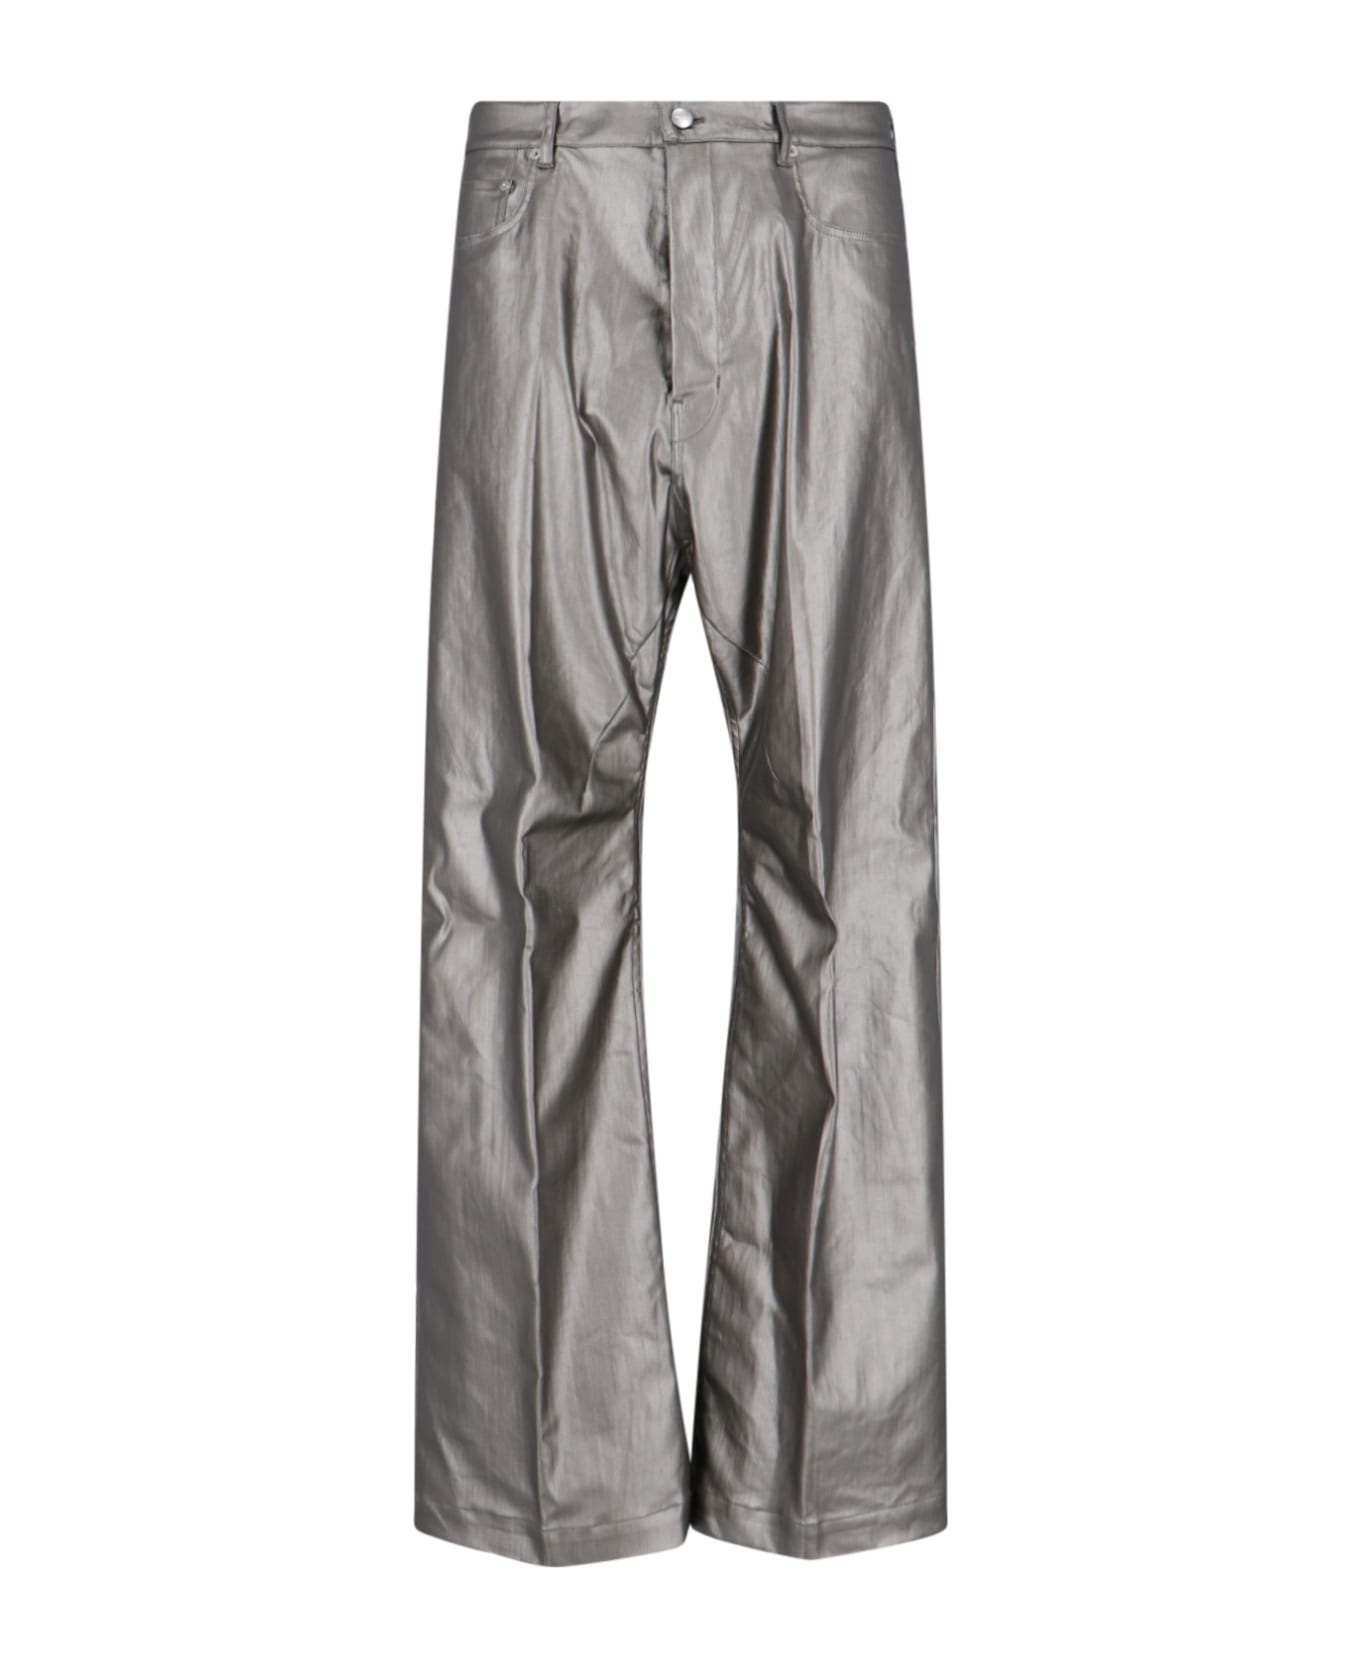 Rick Owens Coated Jeans - Gray